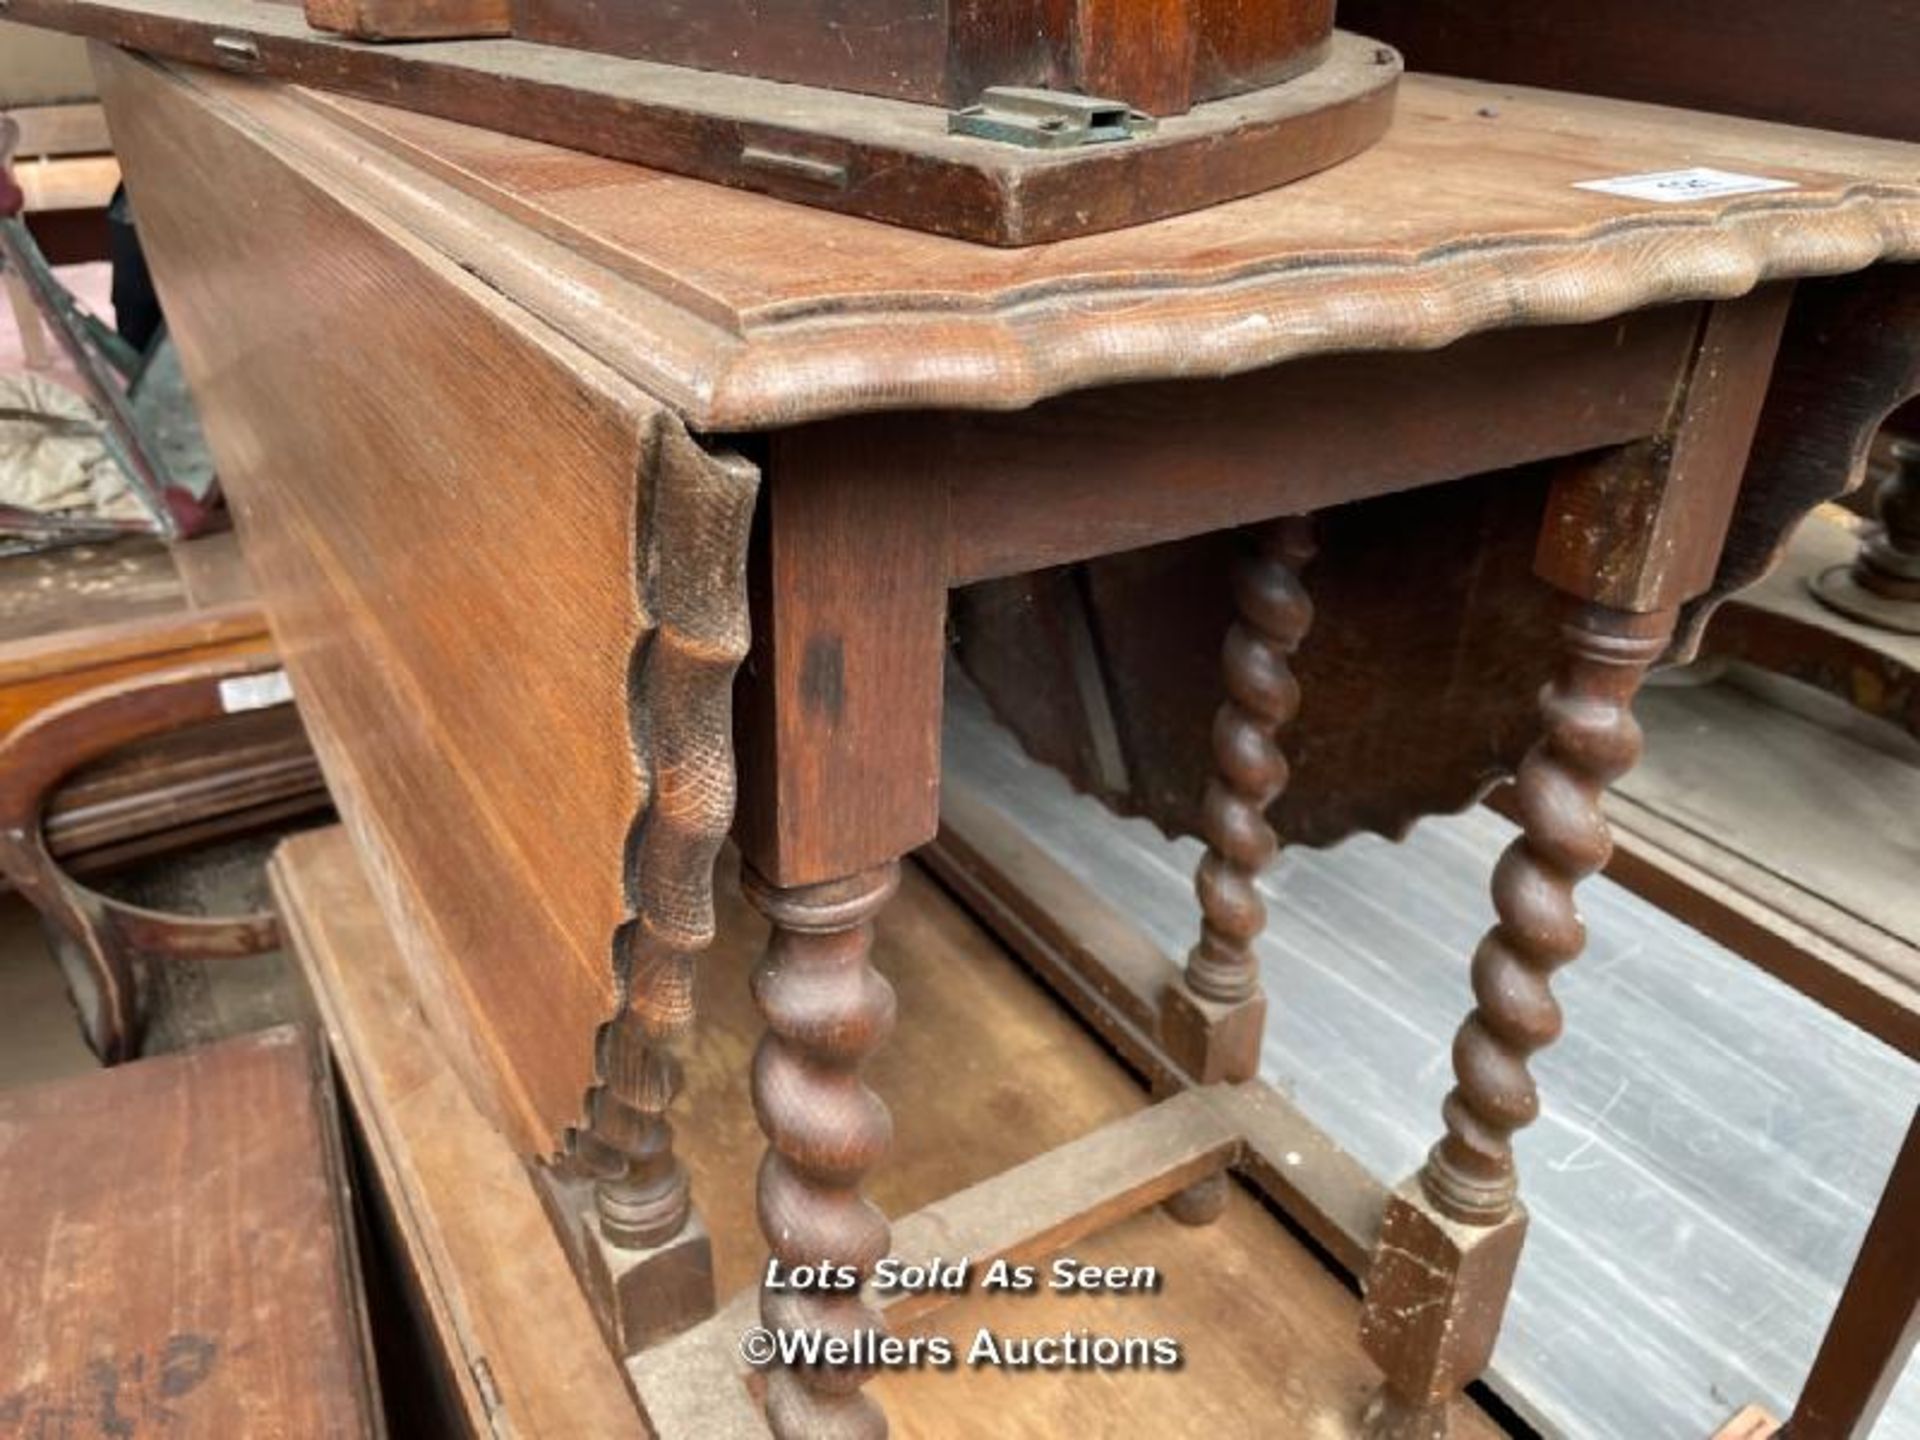 OVAL DROP LEAF TABLE ON BARLEY TWIST LEGS, 41 X 66 X 29 INCHES, FULLY EXTENDED / LOCATED AT VICTORIA - Image 2 of 2